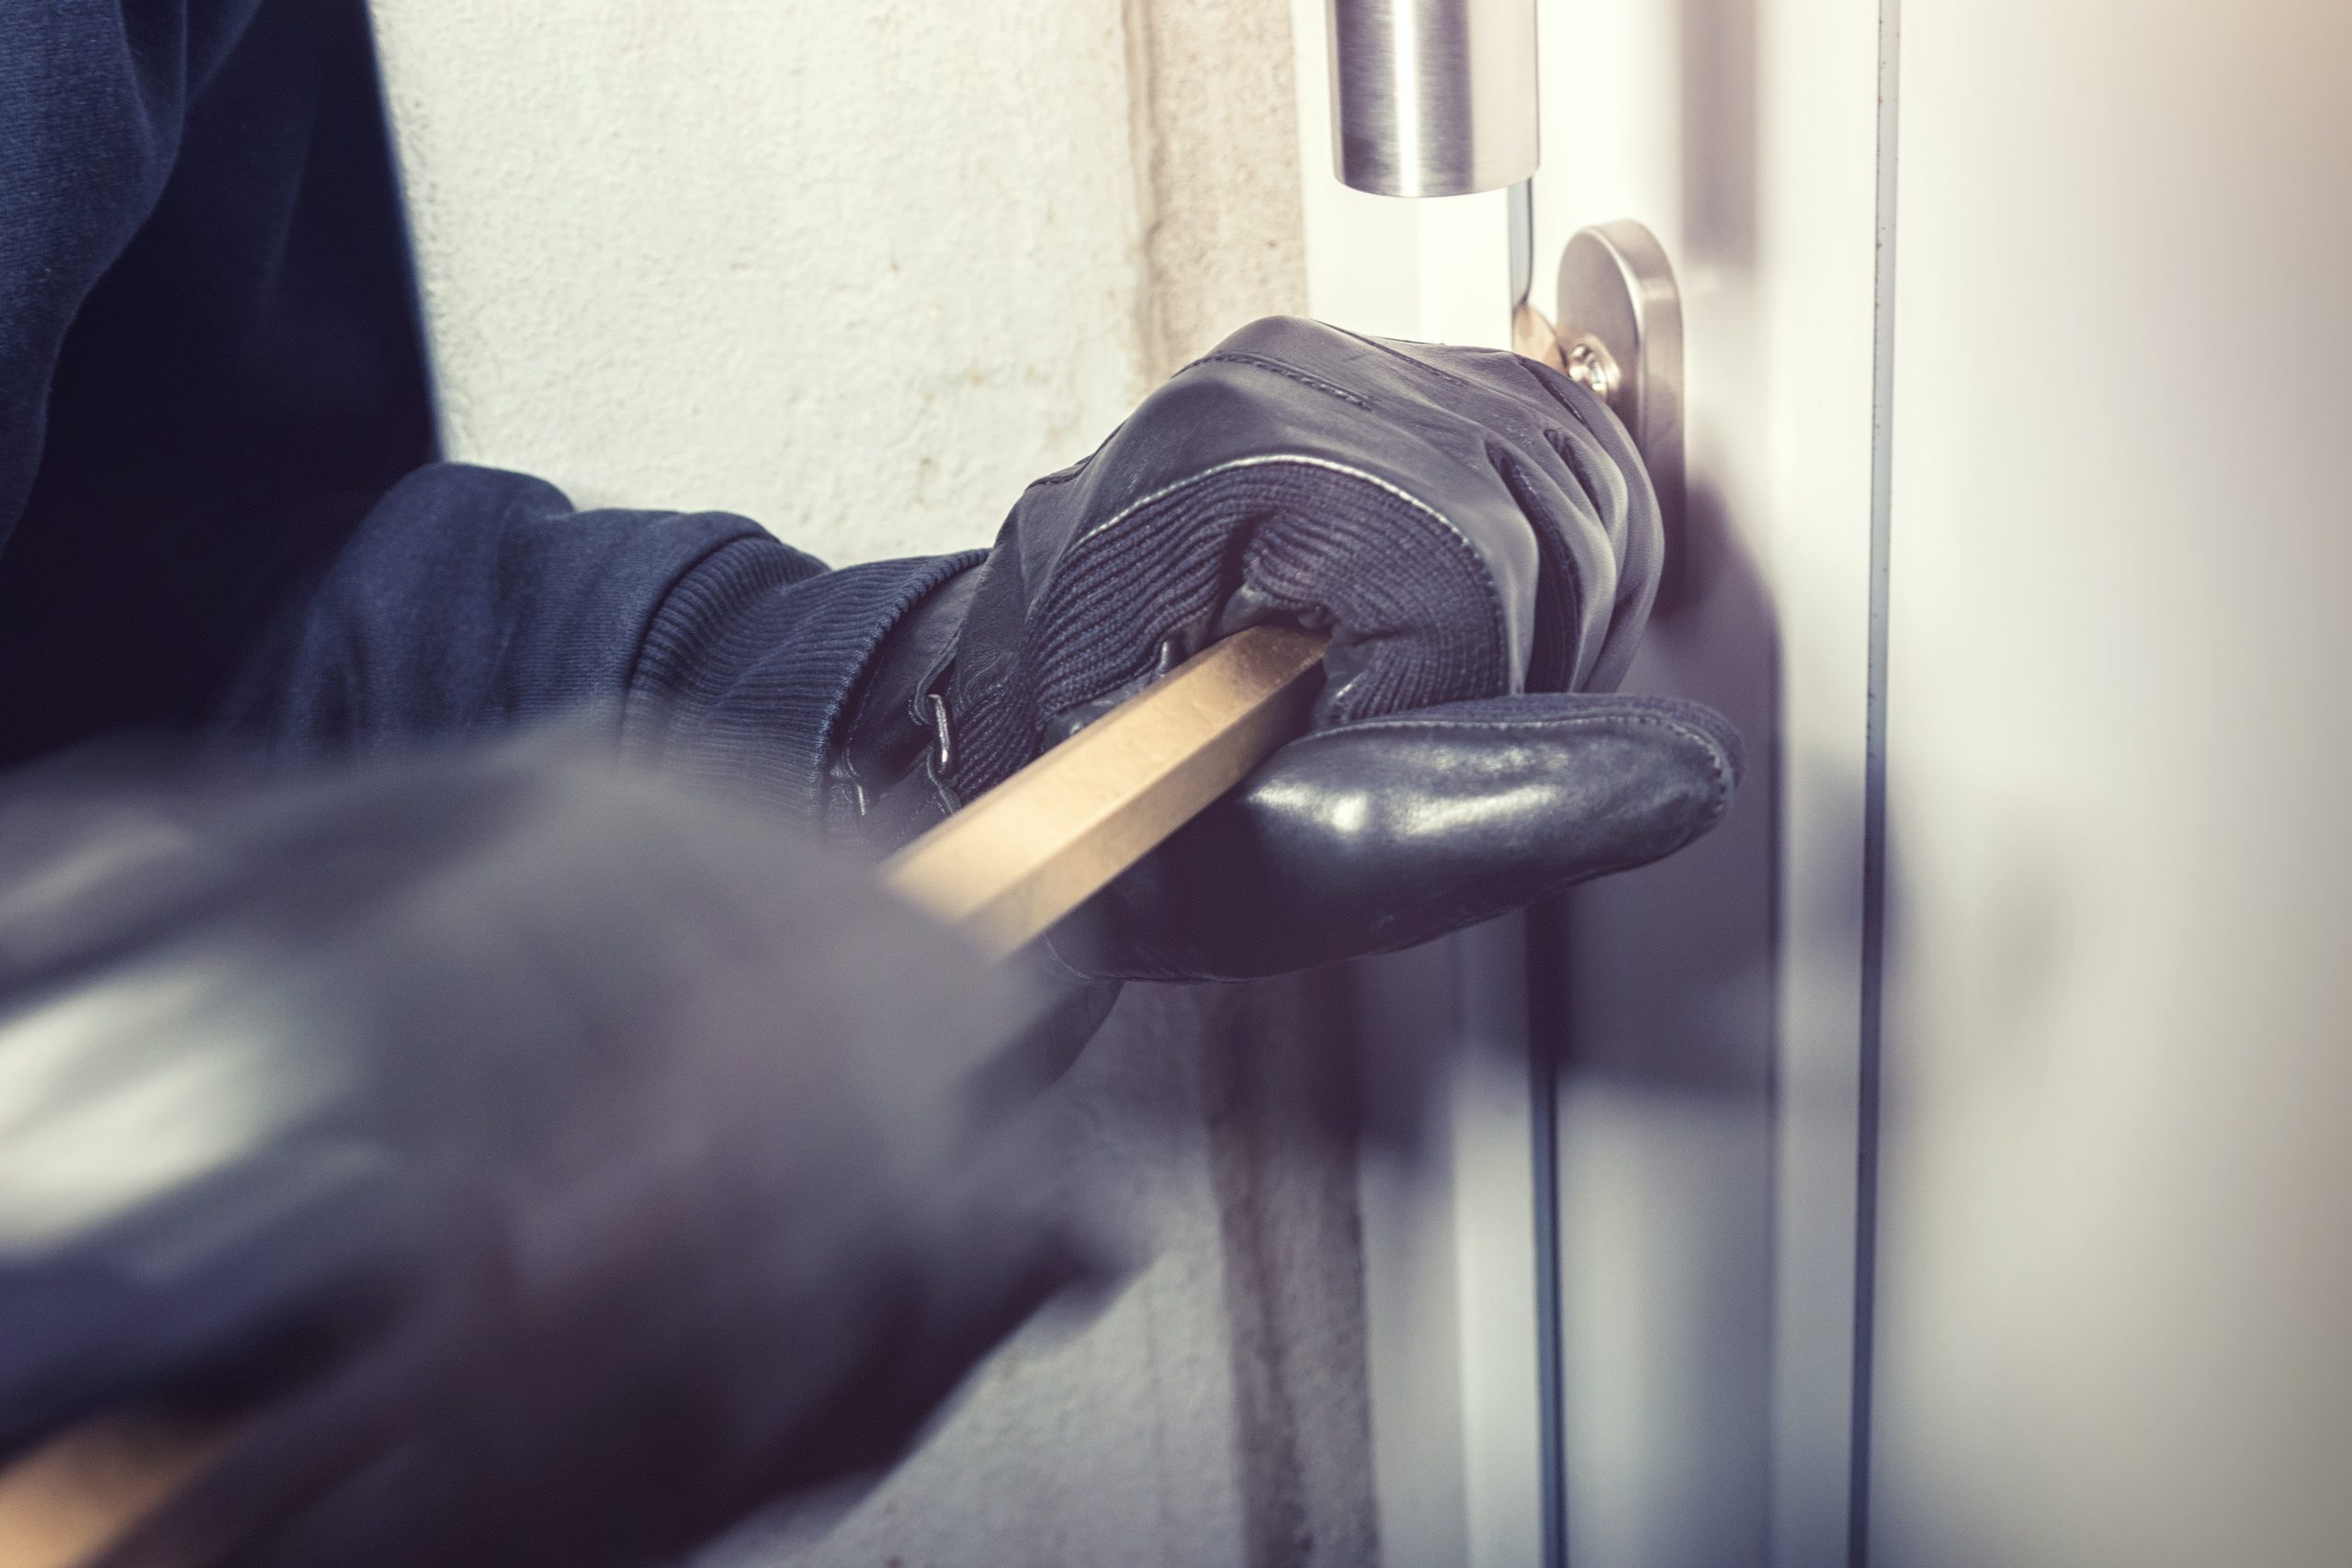 A burglar forcing a door with a crowbar